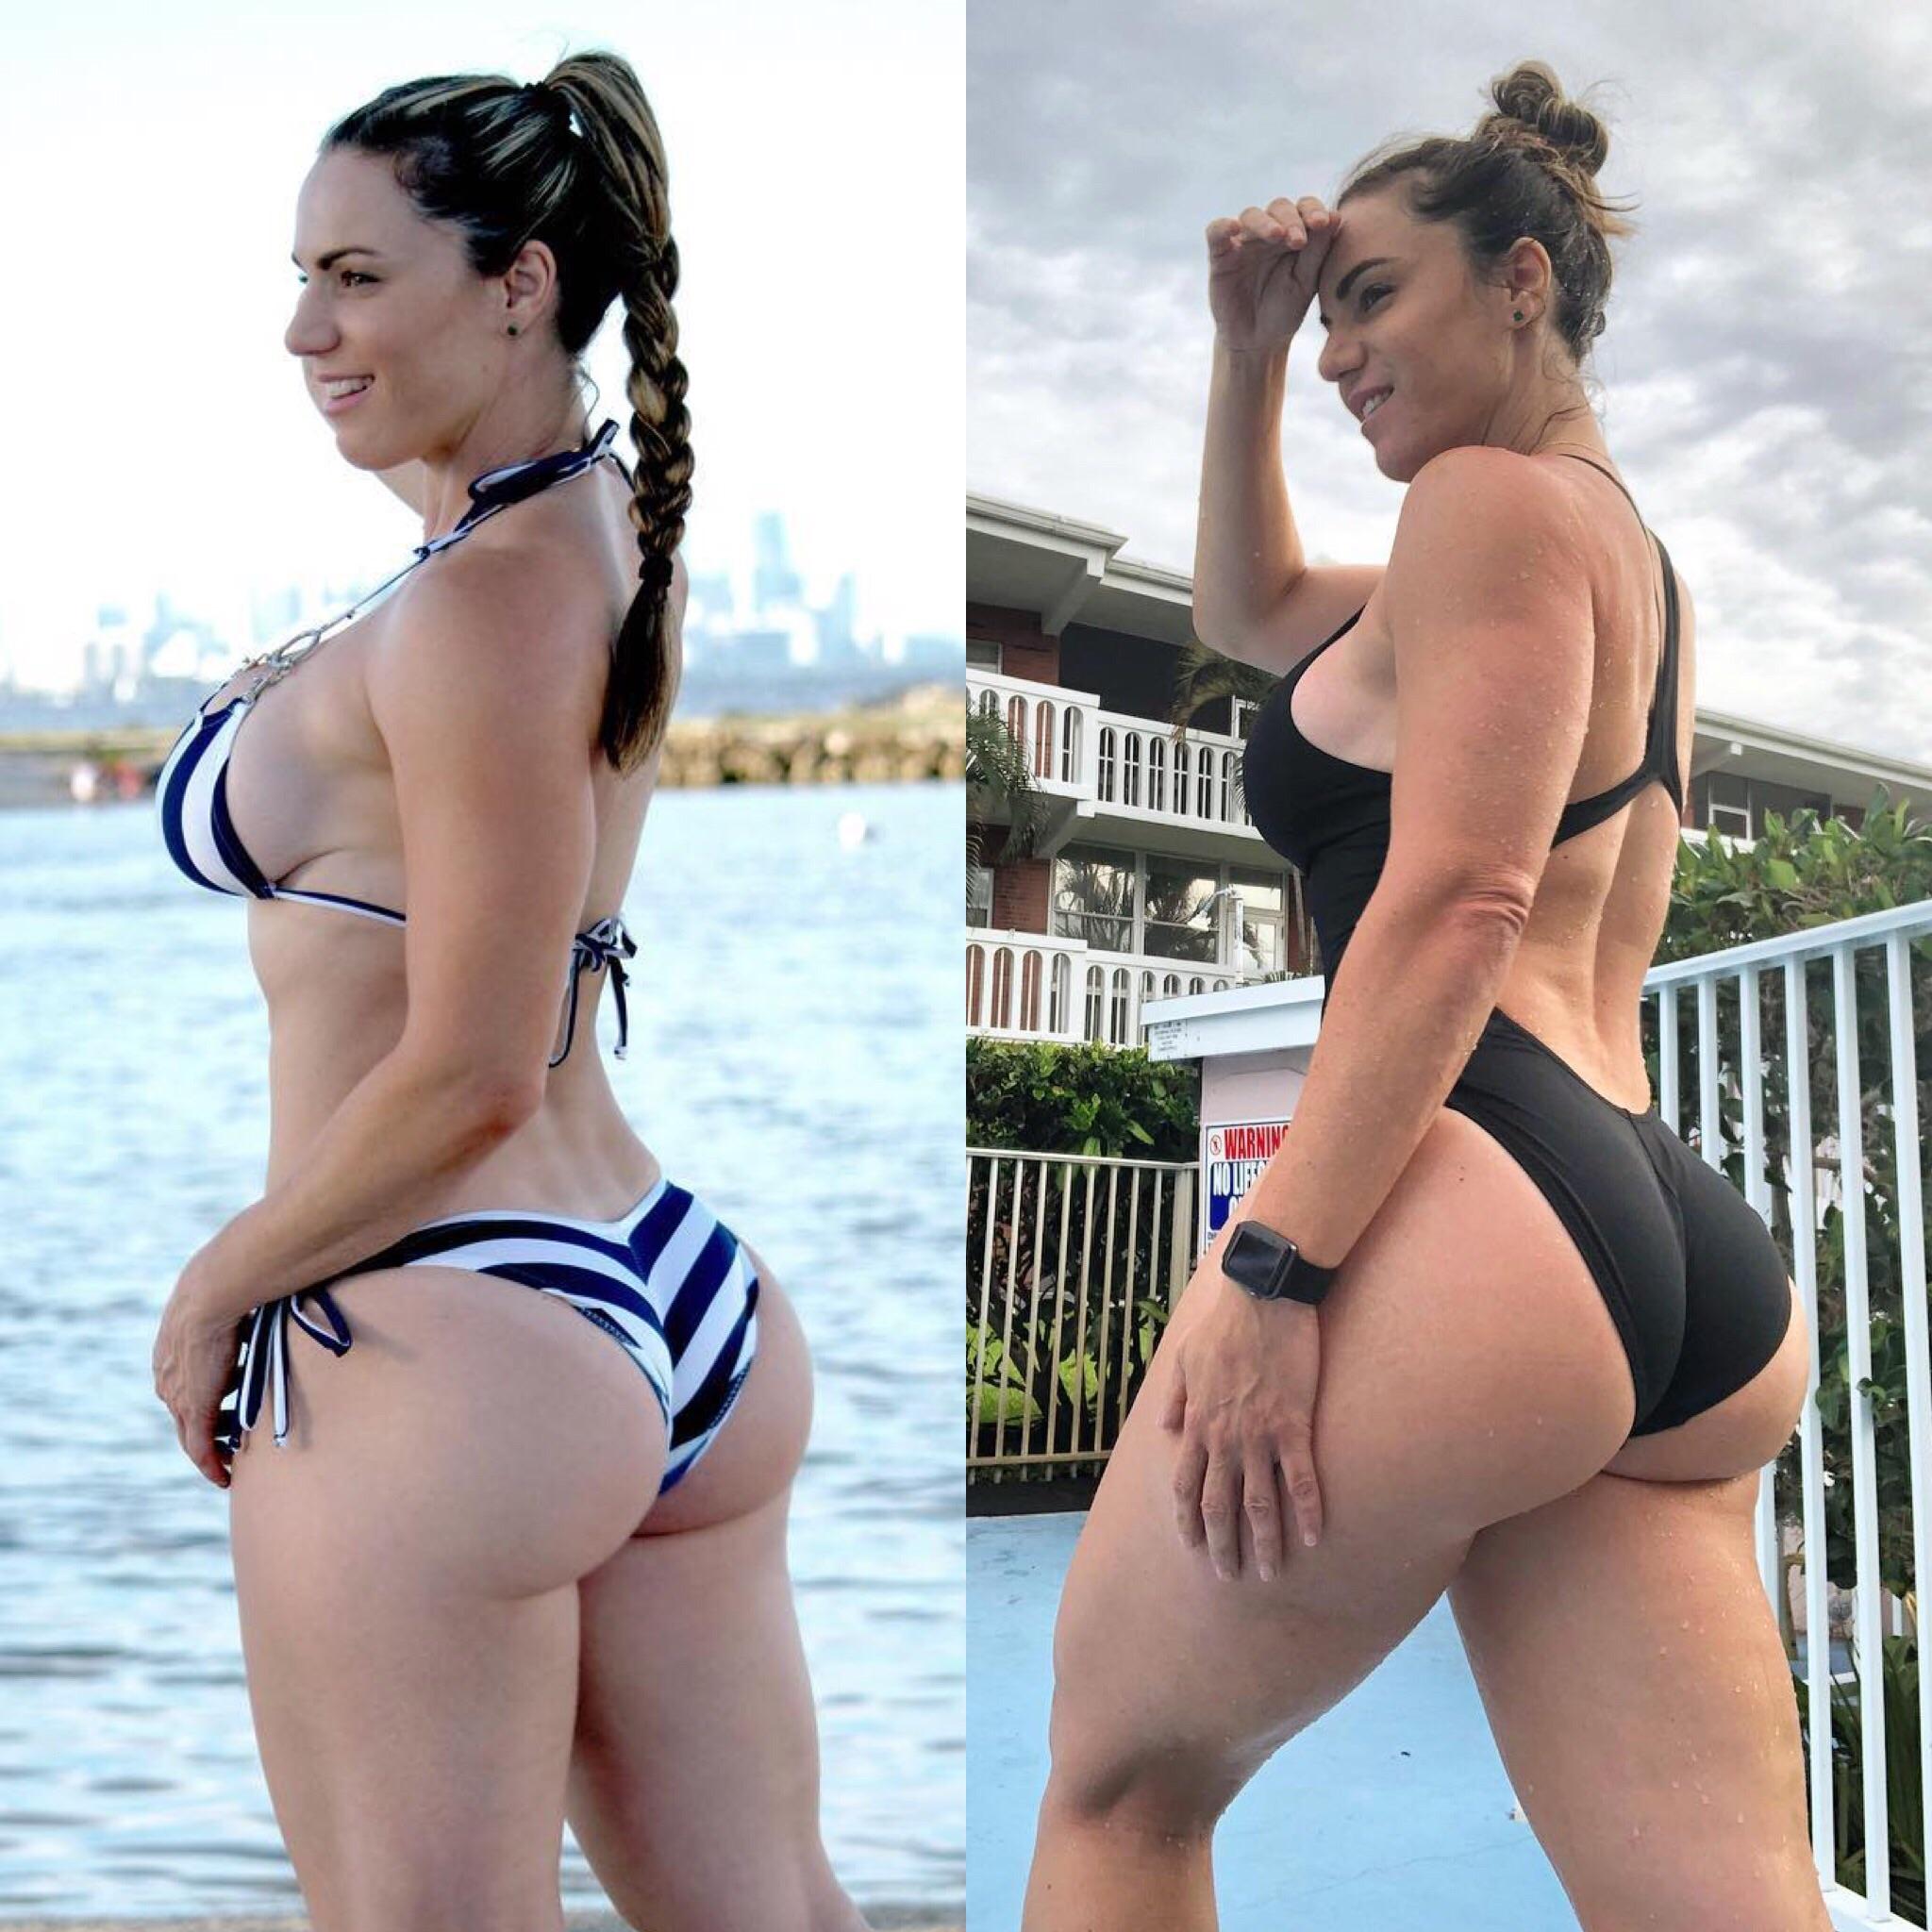 PAWG Which one